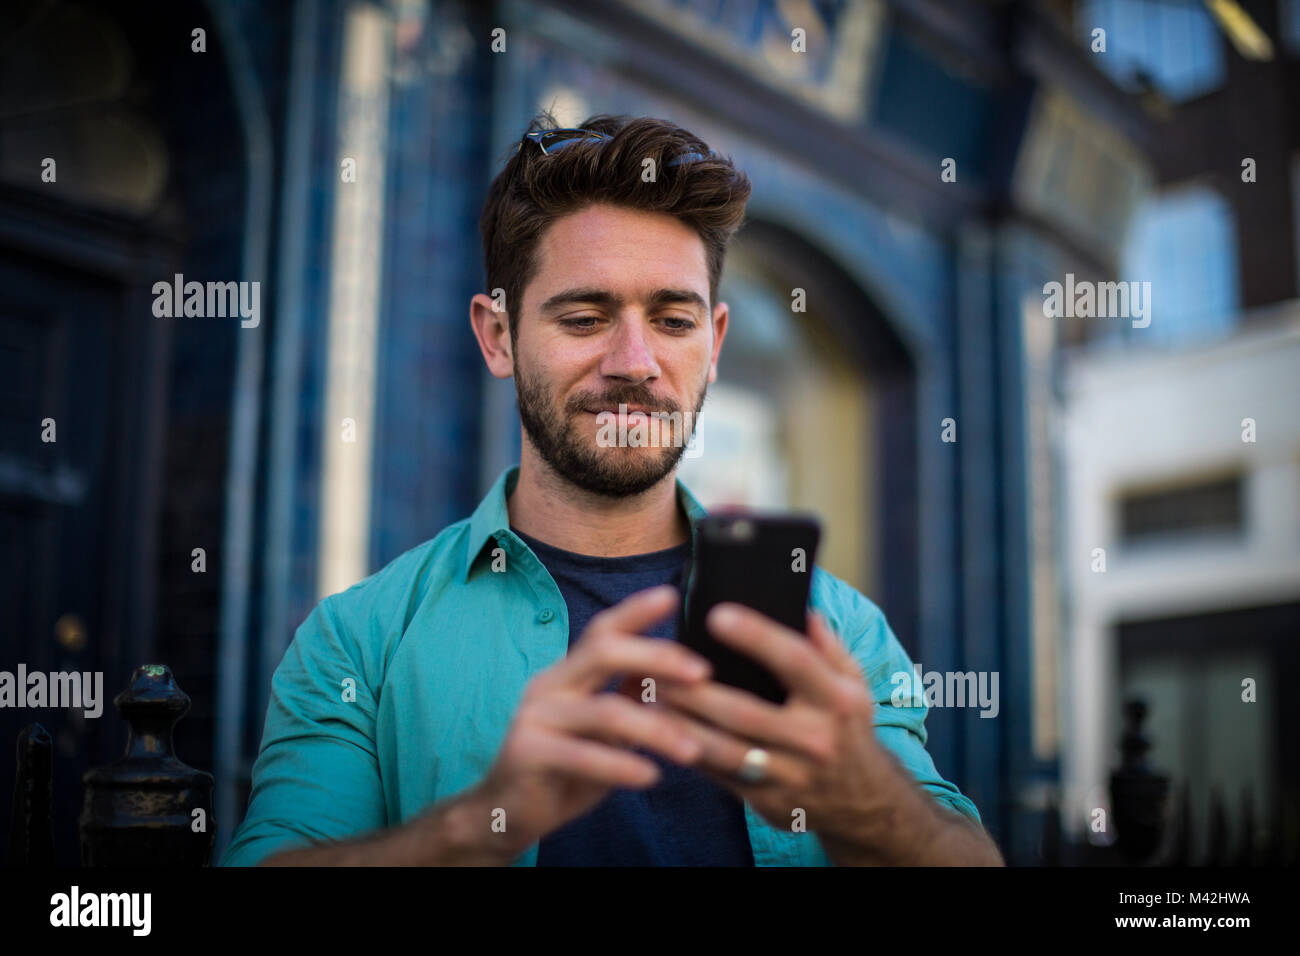 Young adult standing outside London pub using smartphone Stock Photo